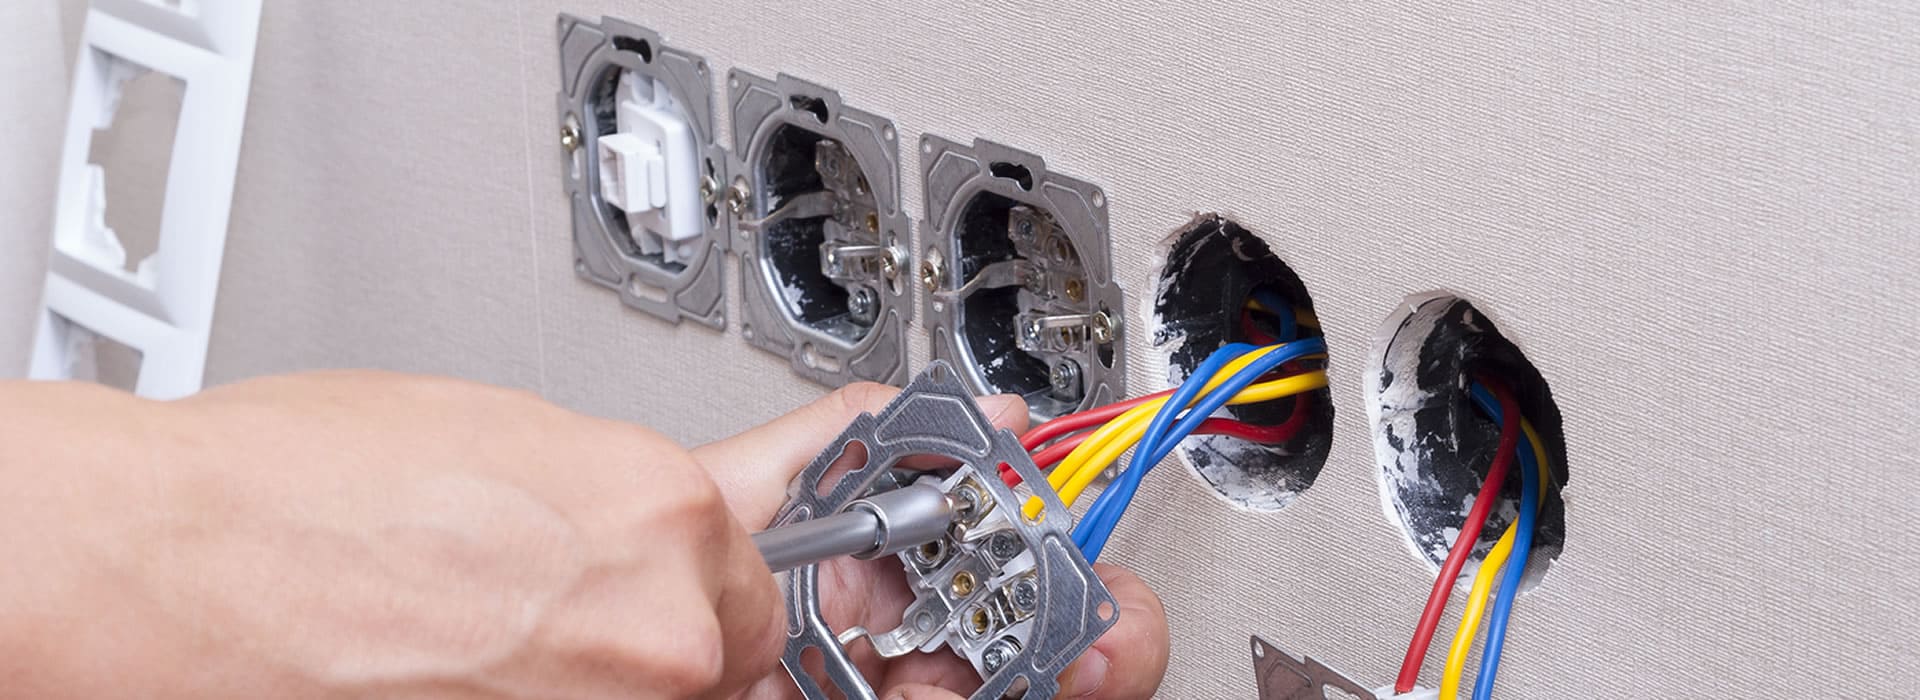 Electrical Outlet Replacement in Islip, NY